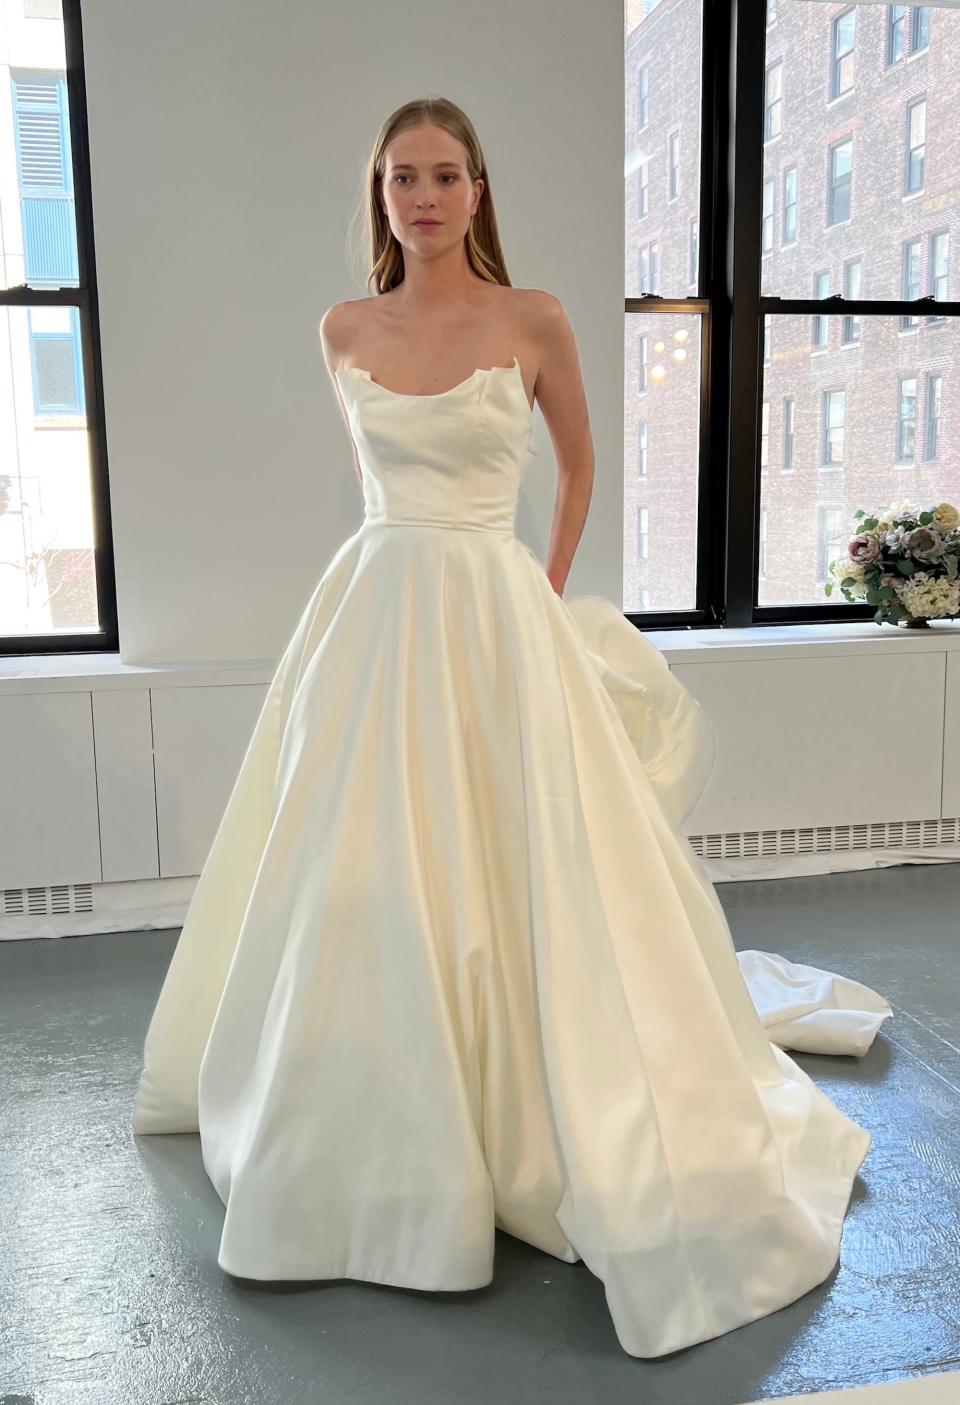 A woman poses in a strapless wedding dress with a full skirt.